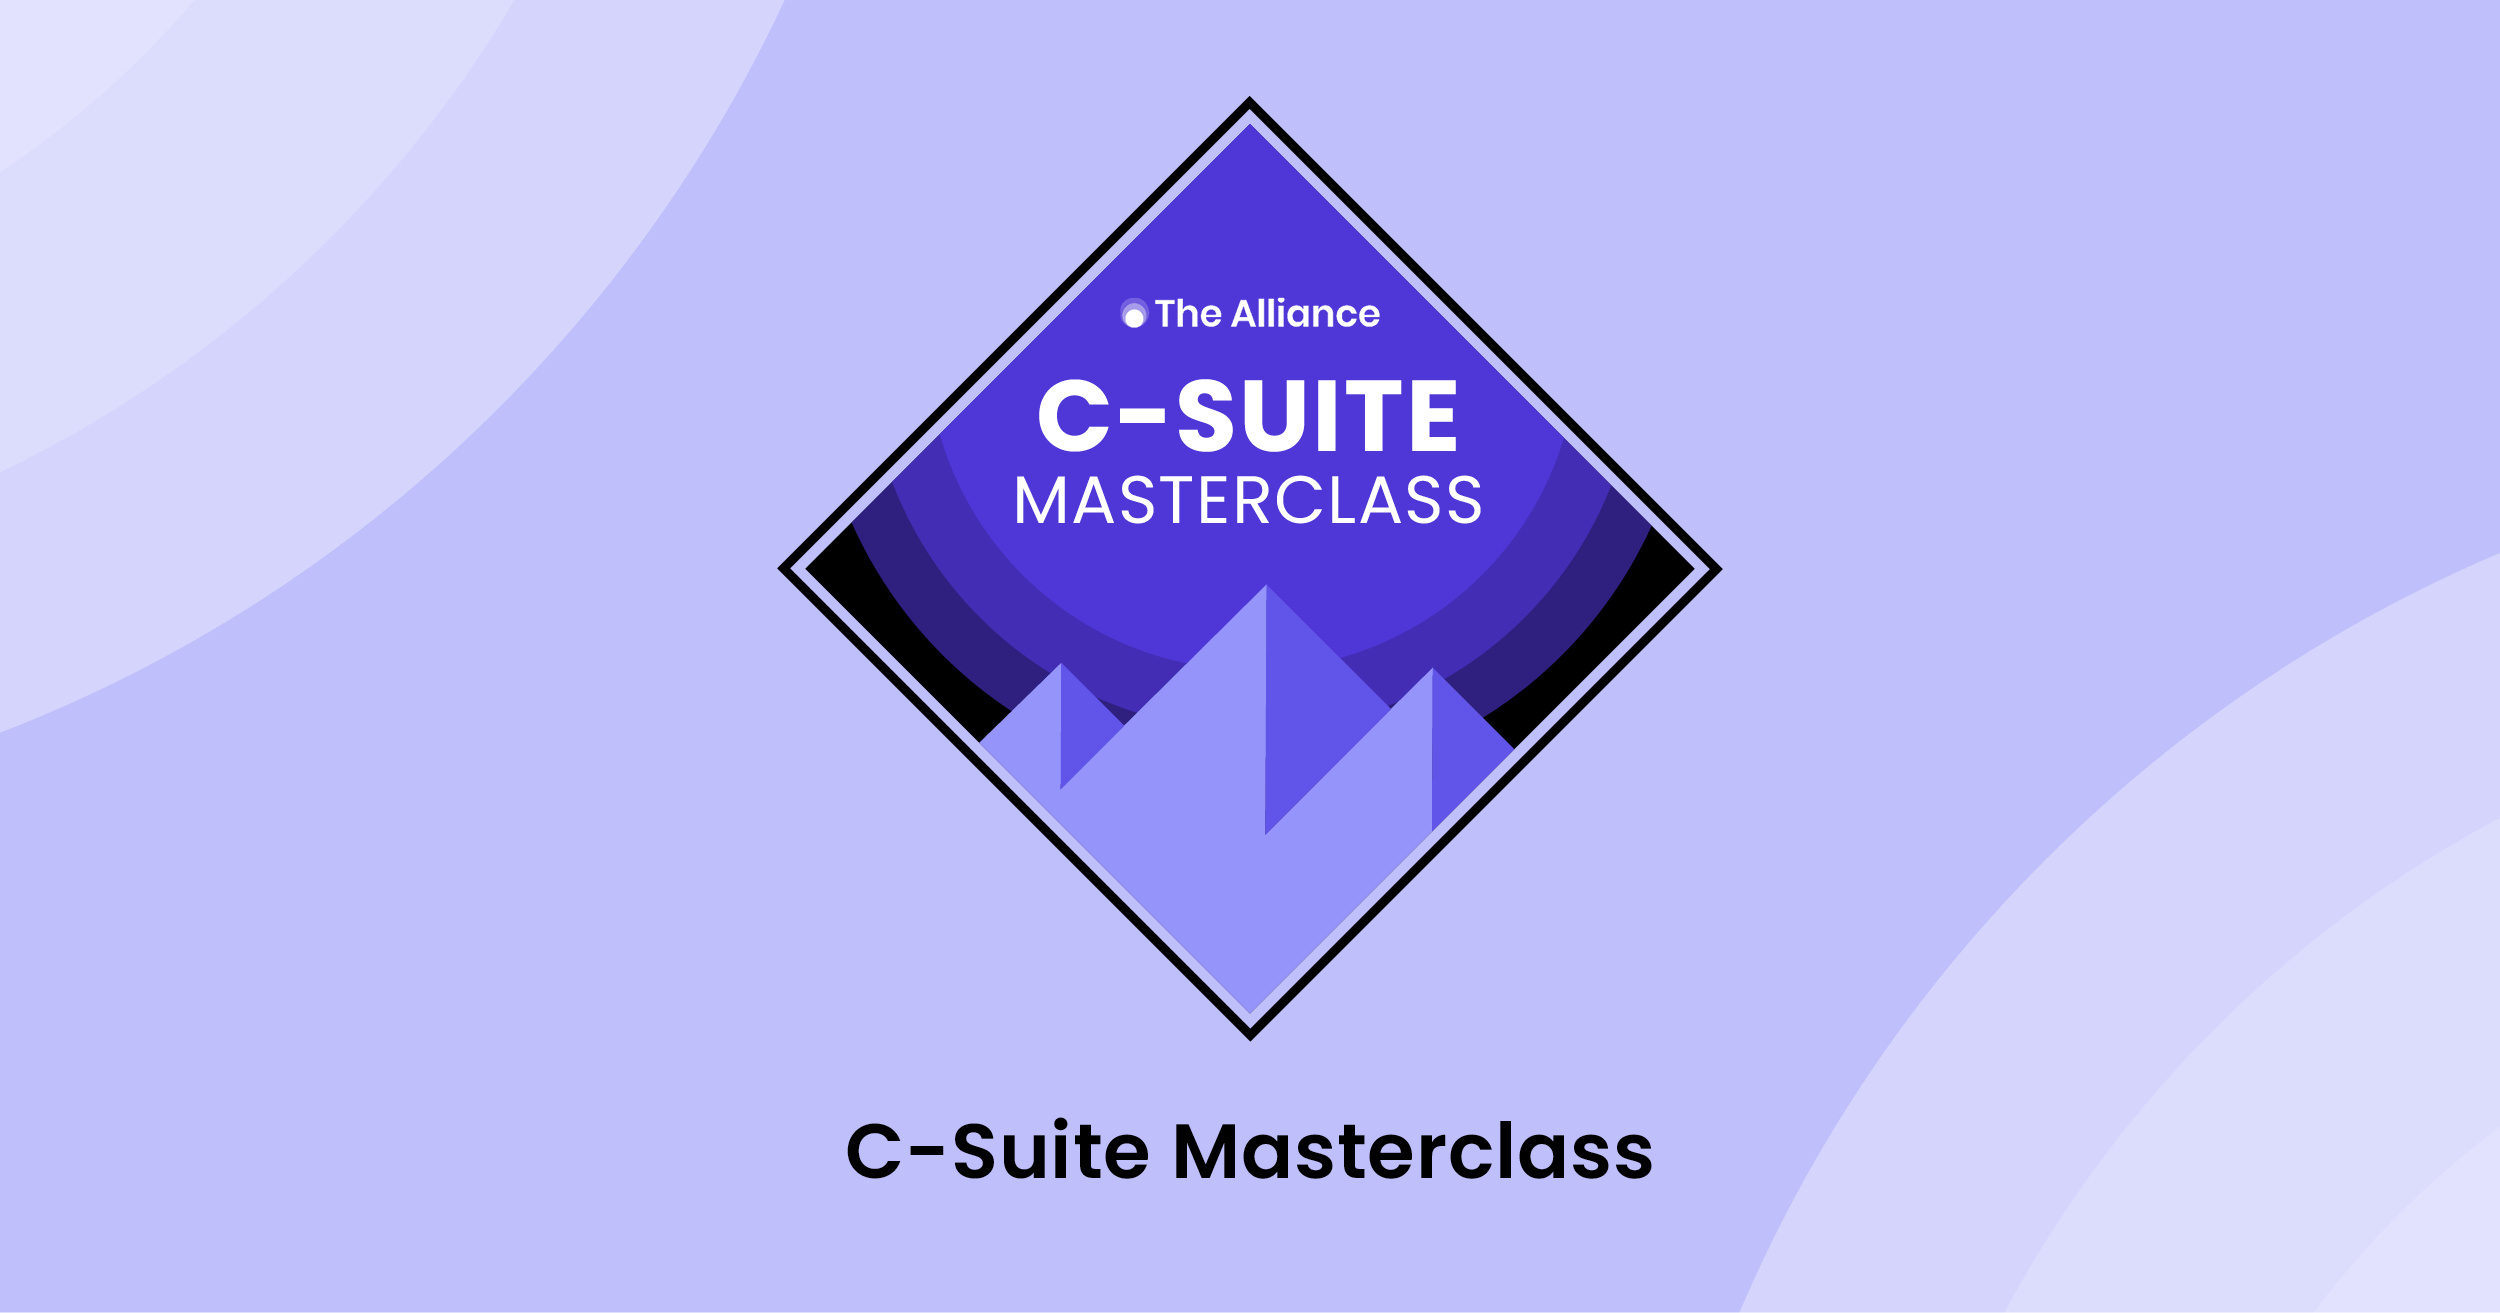 Become a leader of product-led growth with C-Suite Masterclass